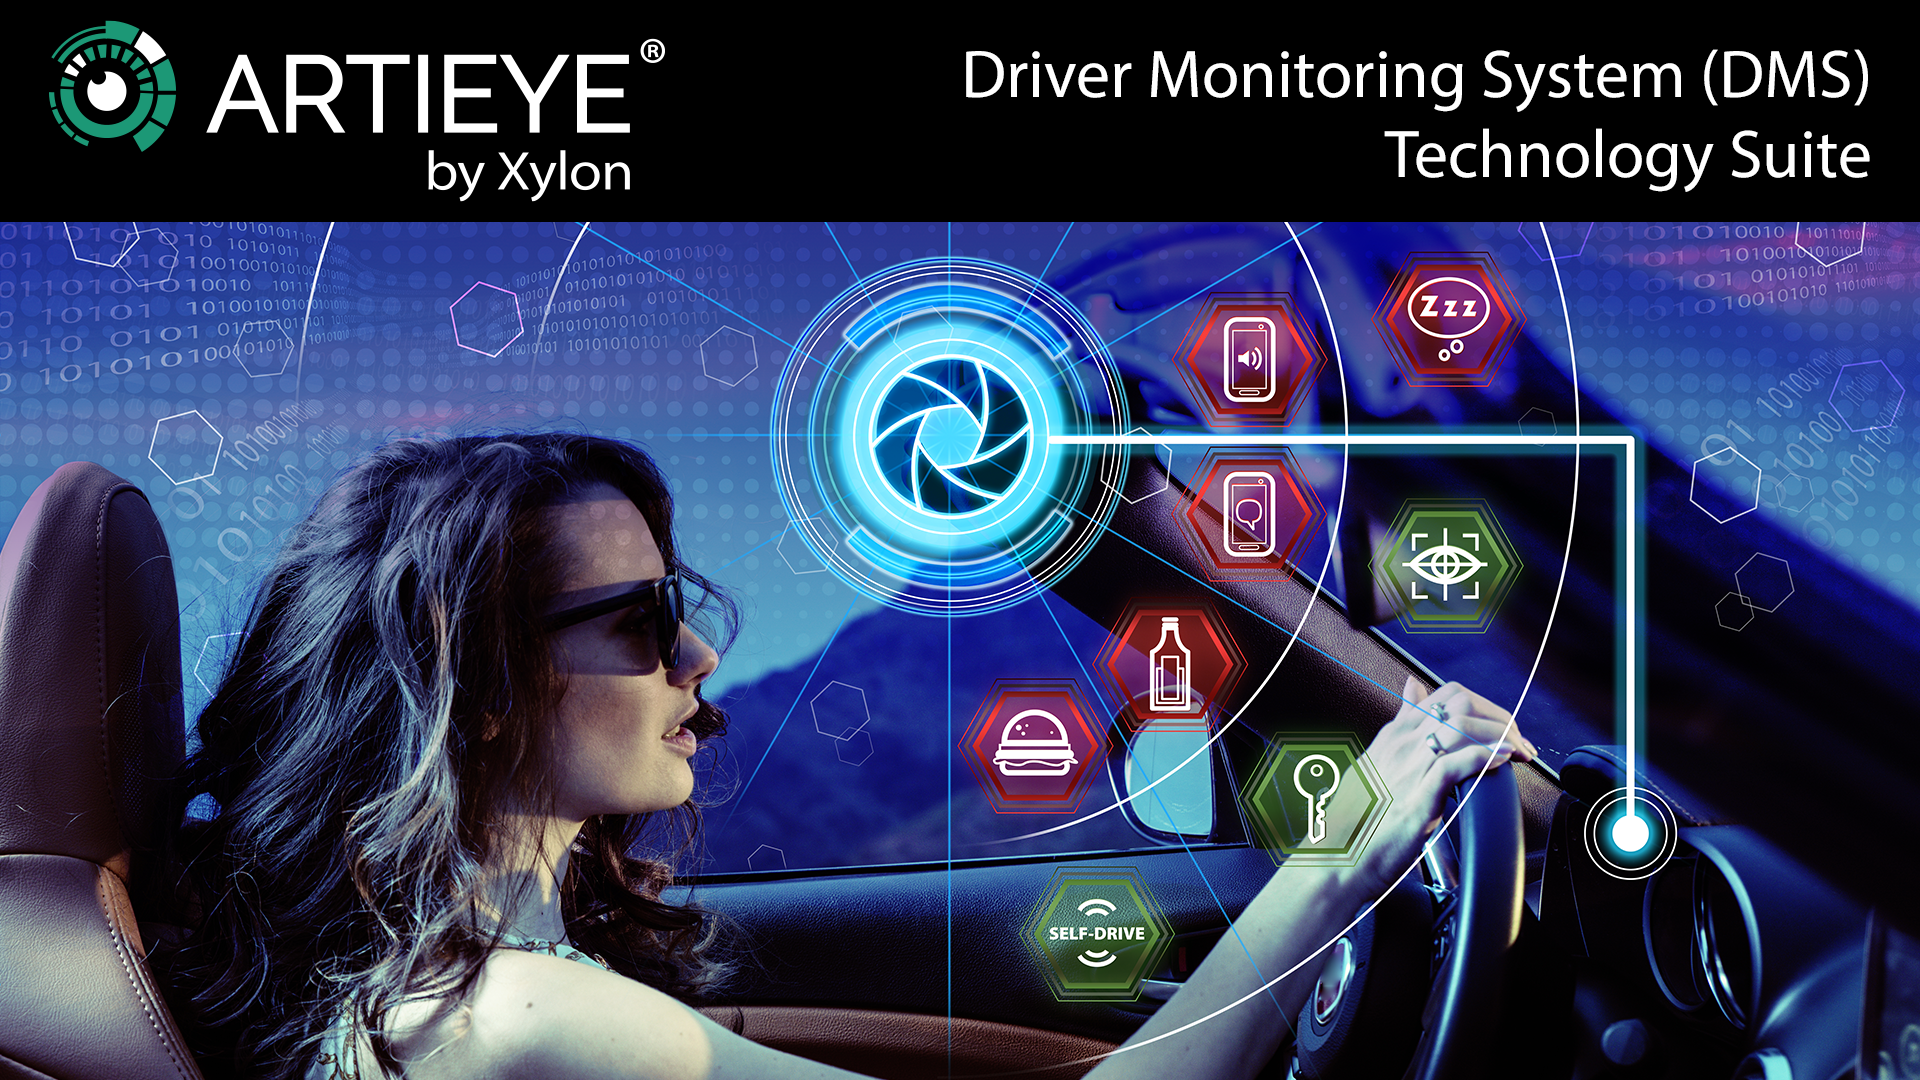 Xylon offers ARTIEYE - a complete Technology Suite for customizable AI DMS